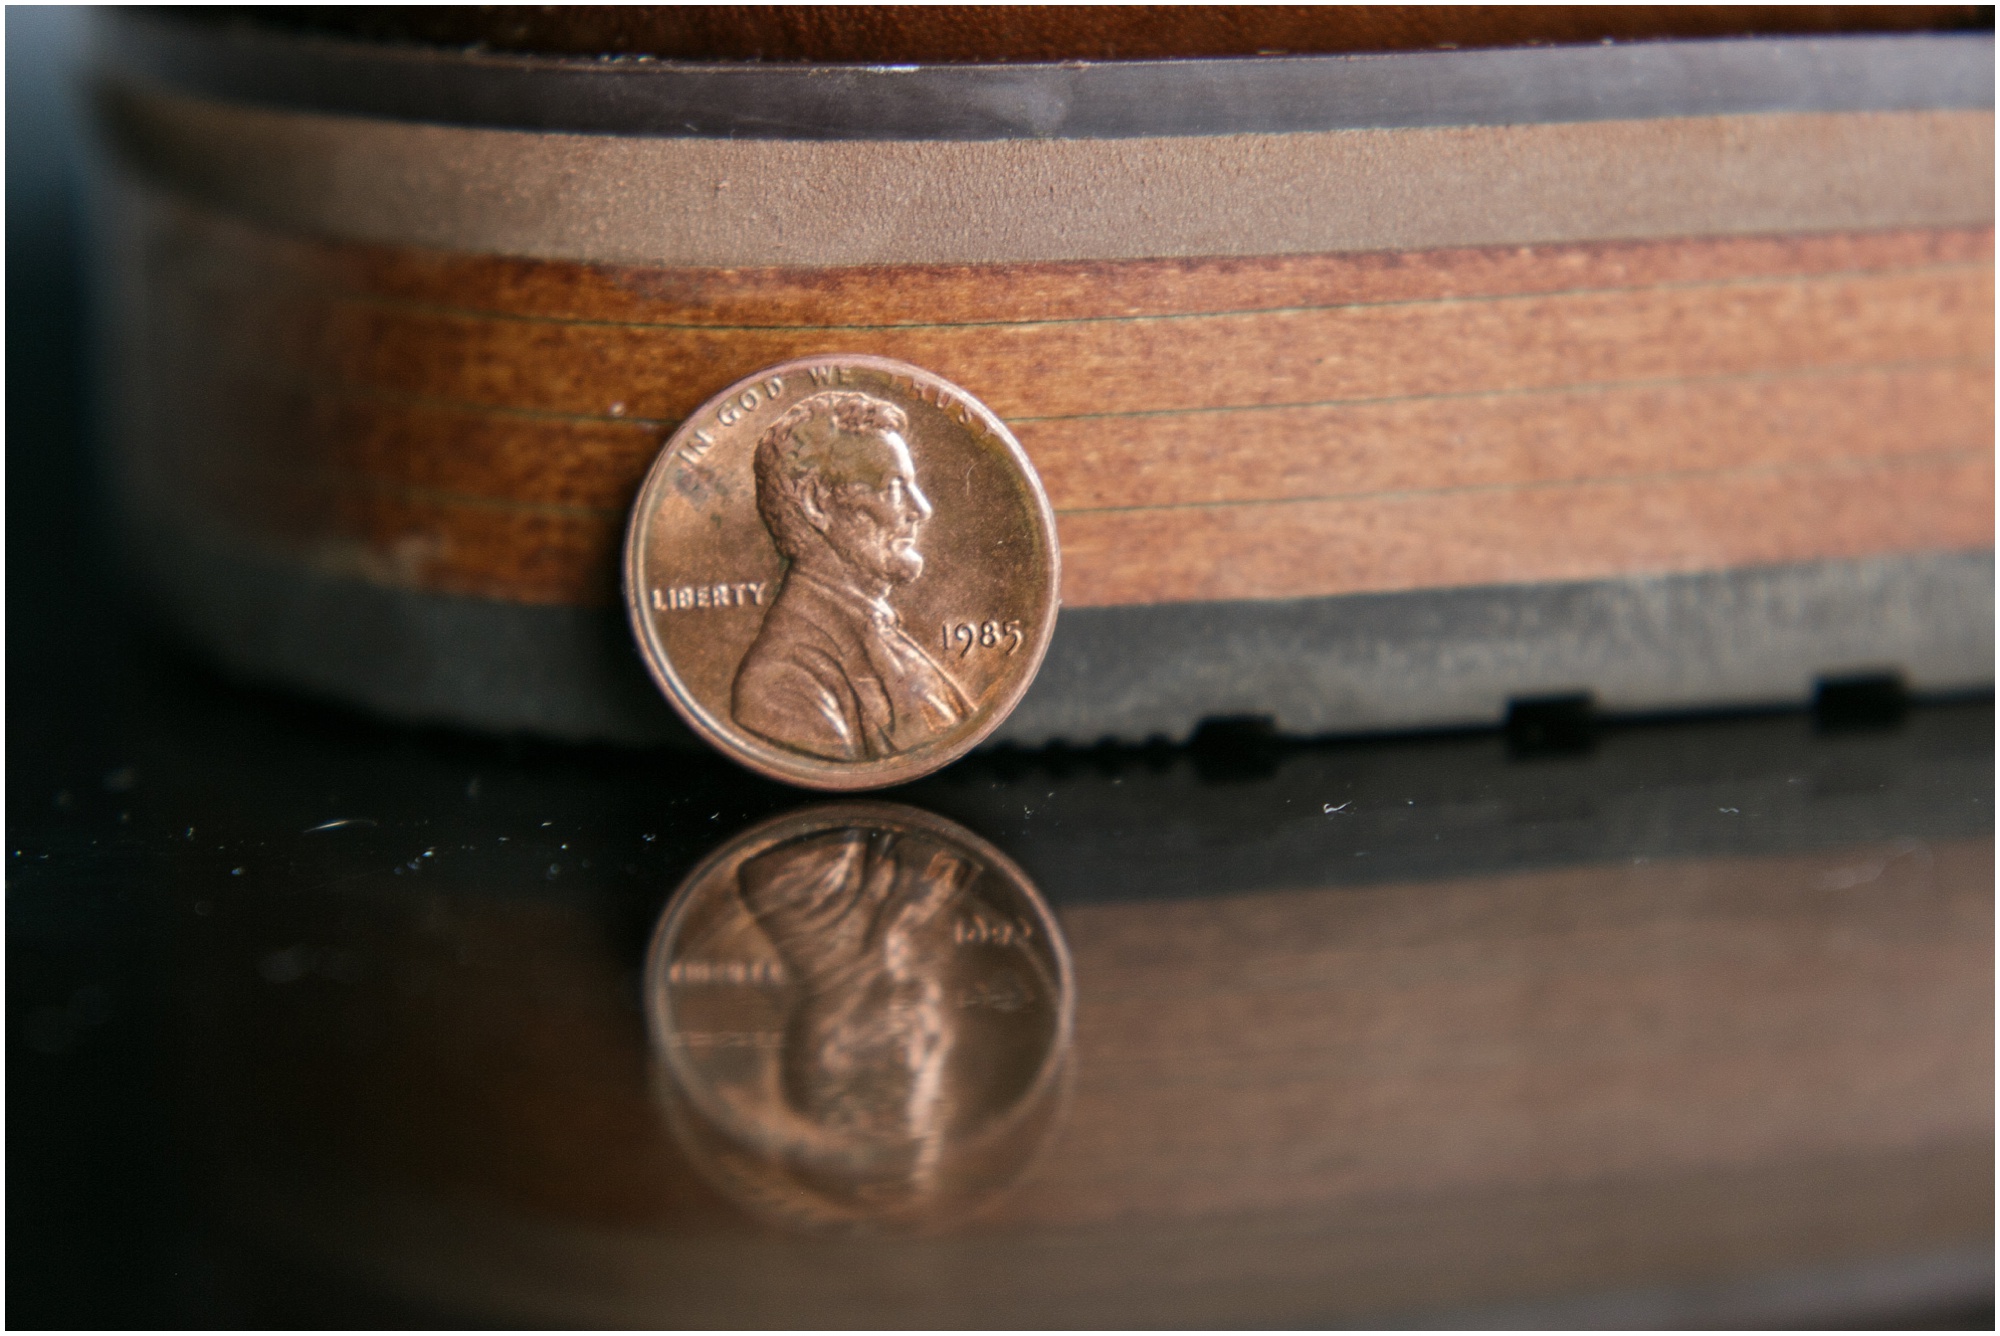 A lucky penny given to the groom from his soon-to-be mother in-law.